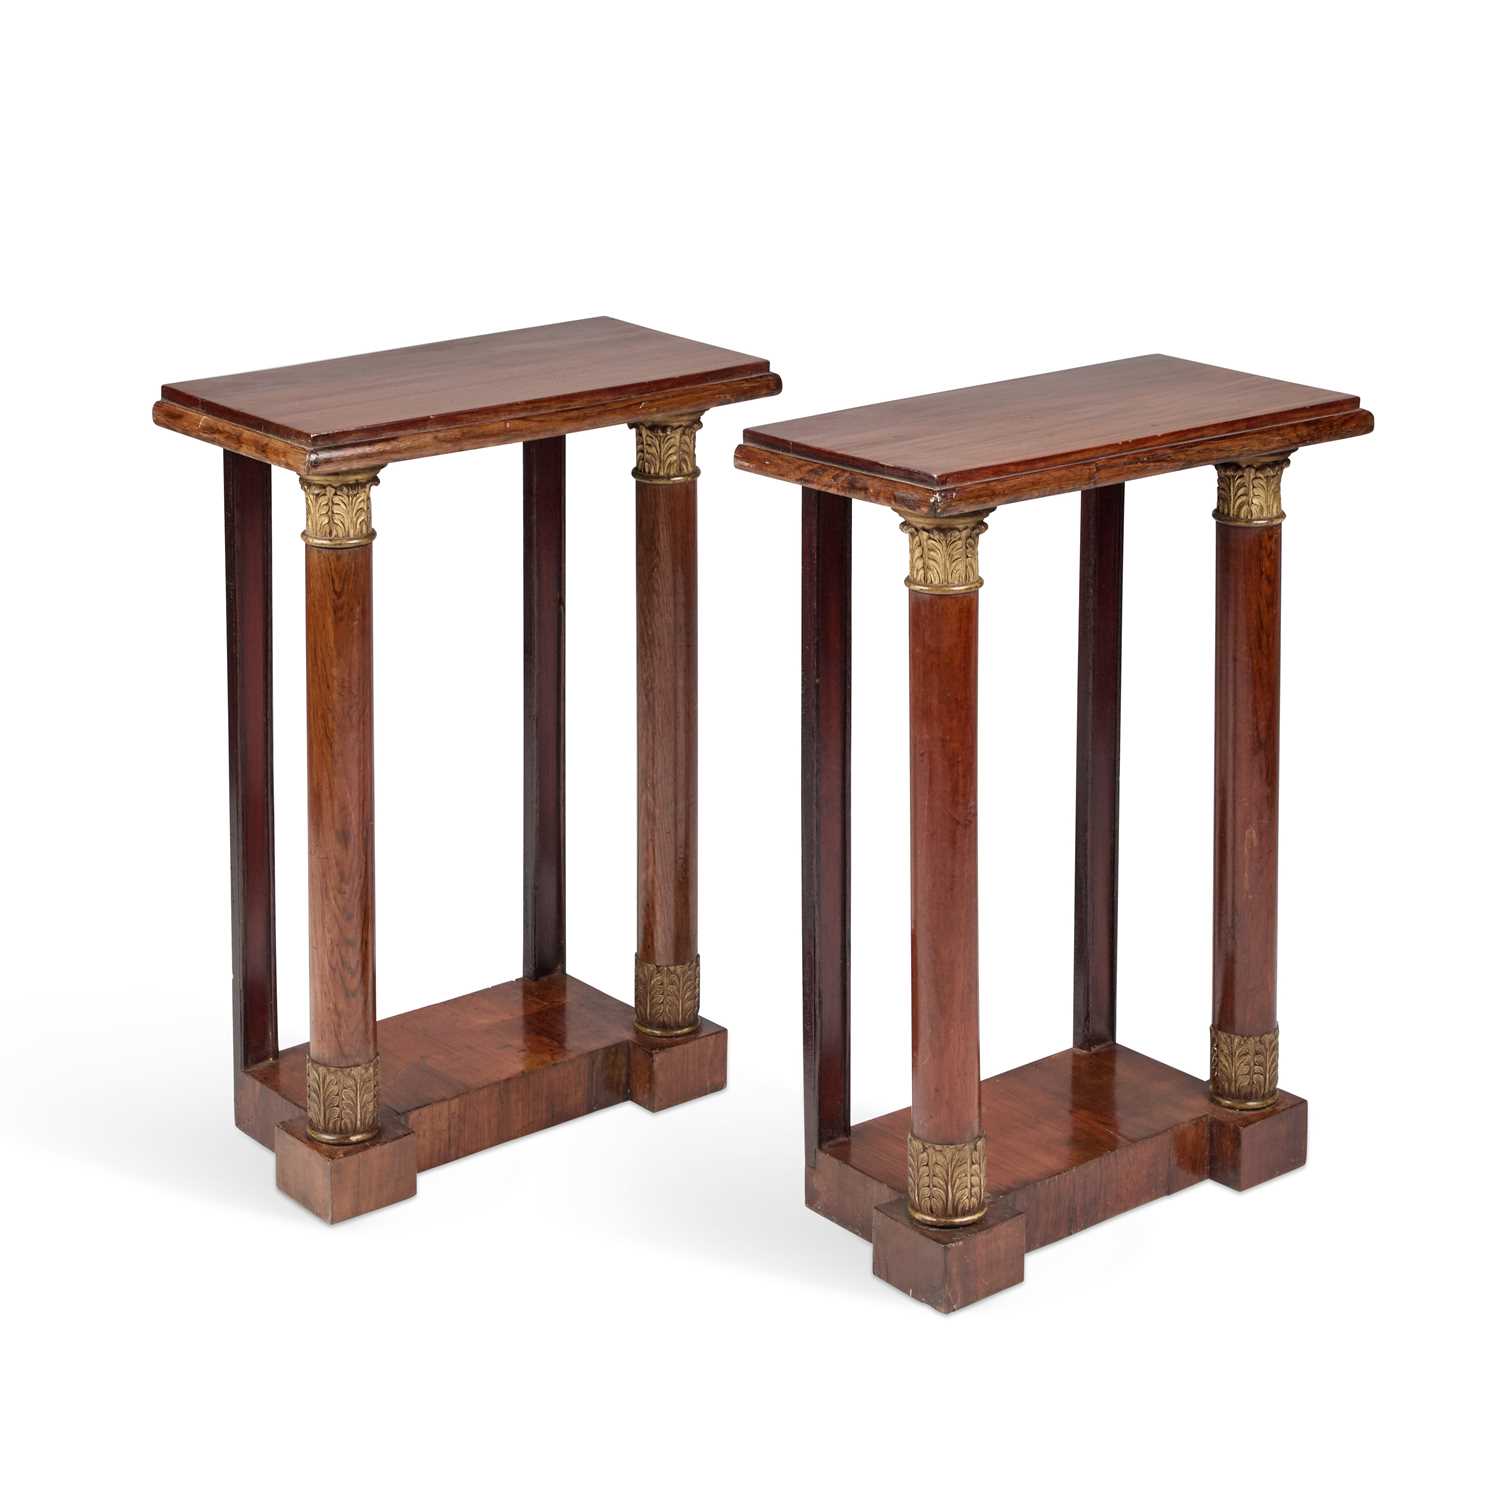 A PAIR OF CONTINENTAL PARCEL-GILT ROSEWOOD PIER TABLES